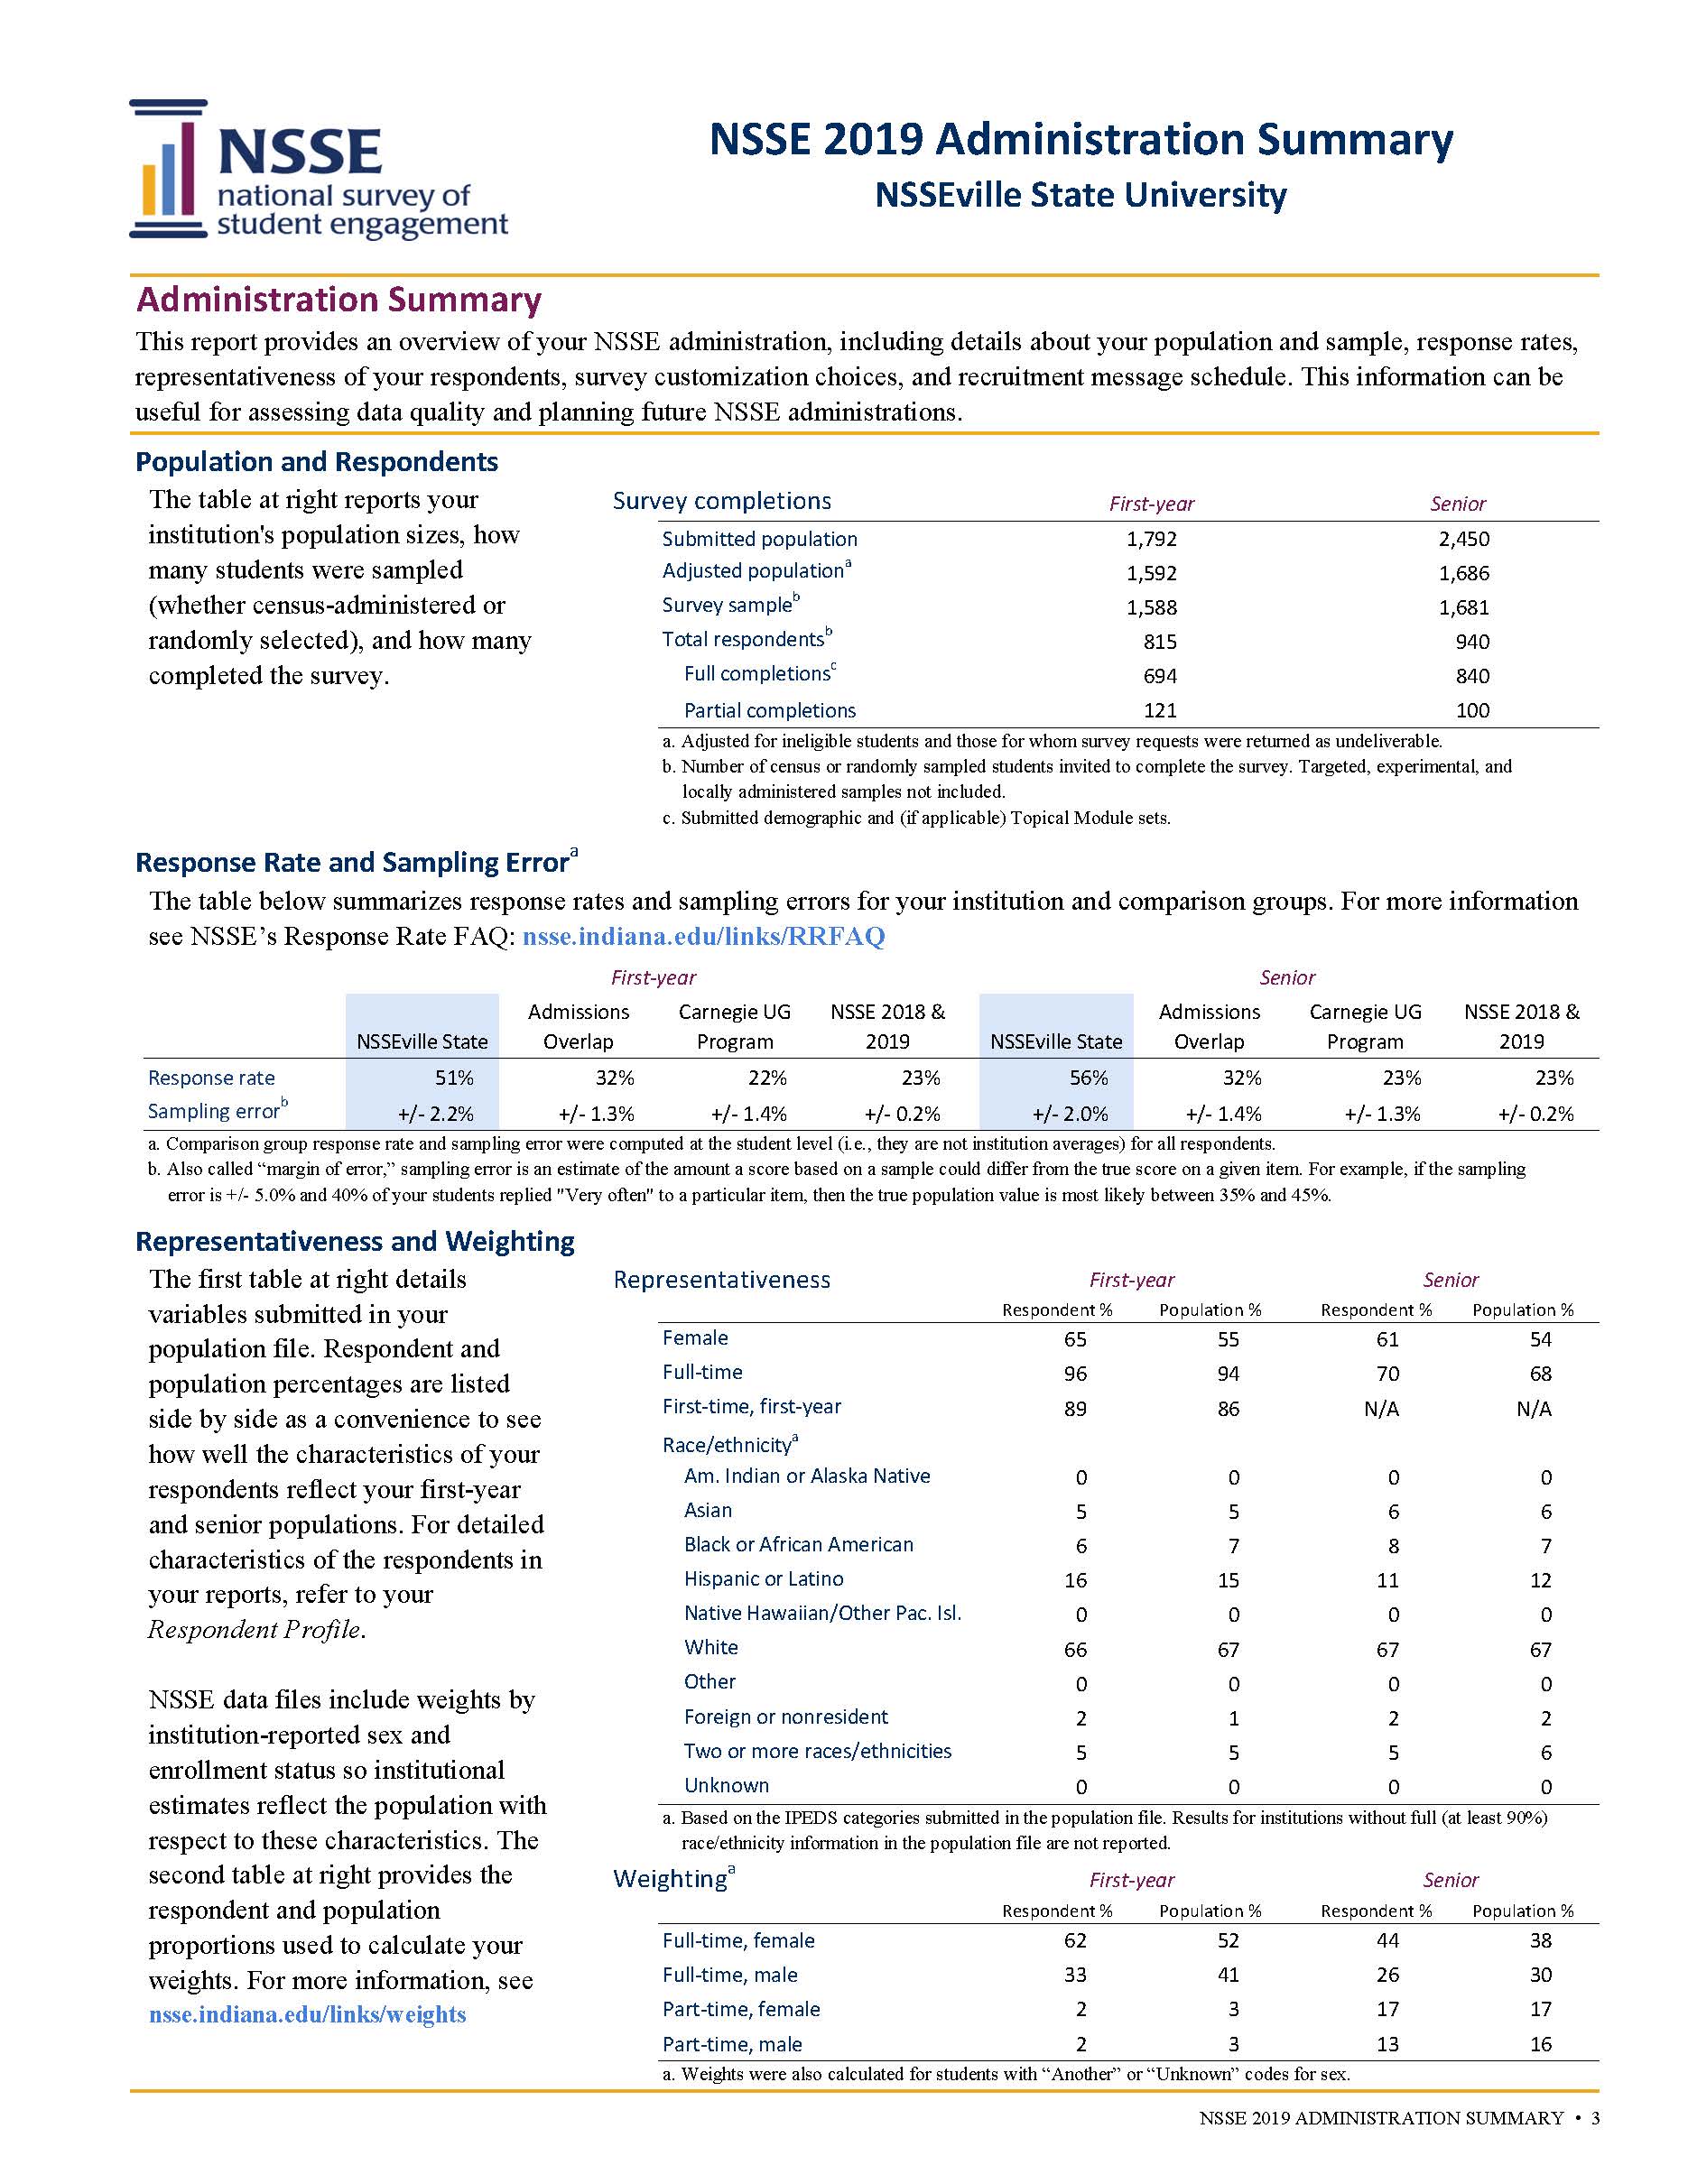 Sample Report: page 3 of NSSE Administration Summary